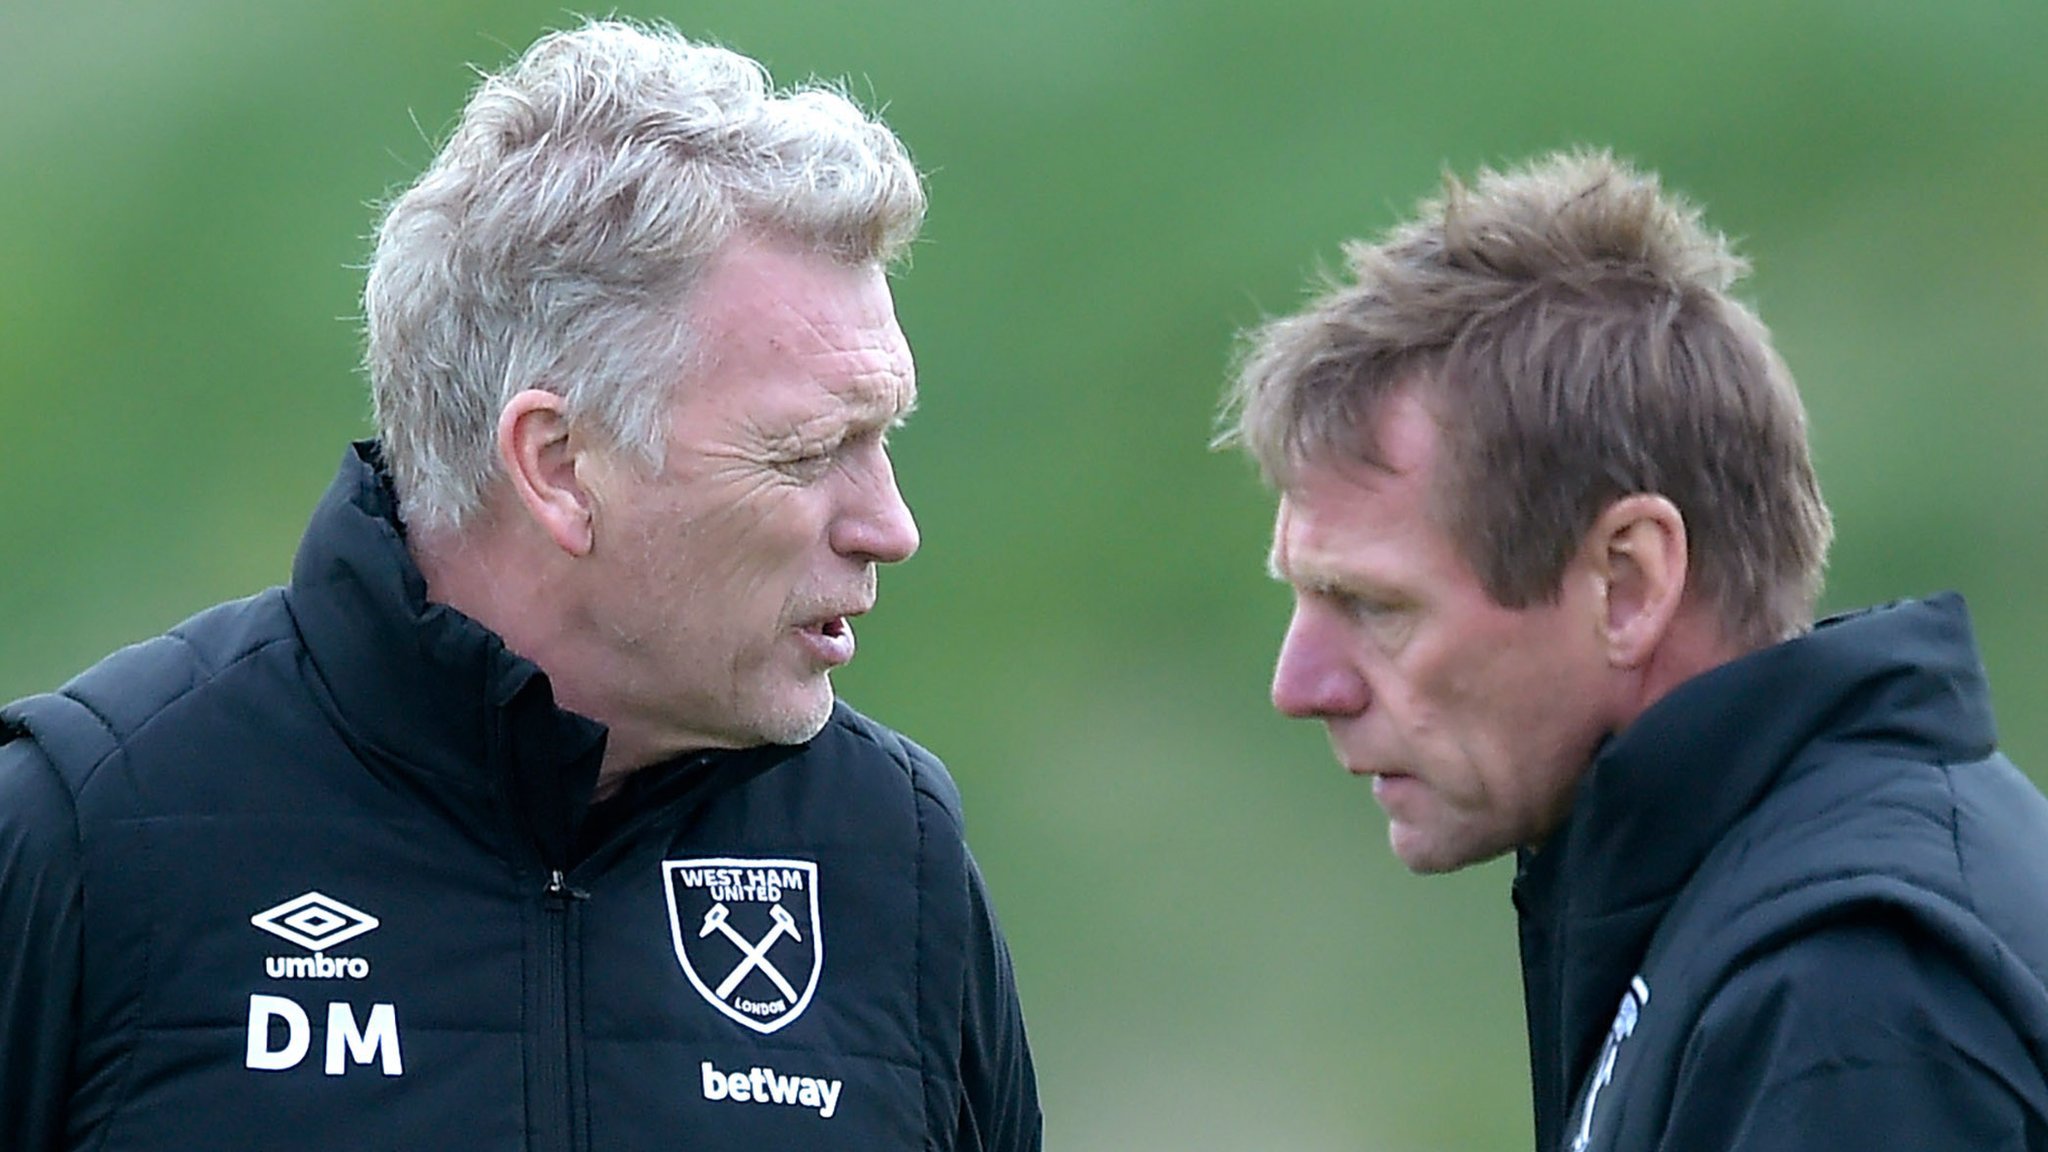 Fitter, faster, stronger - how Moyes can improve West Ham